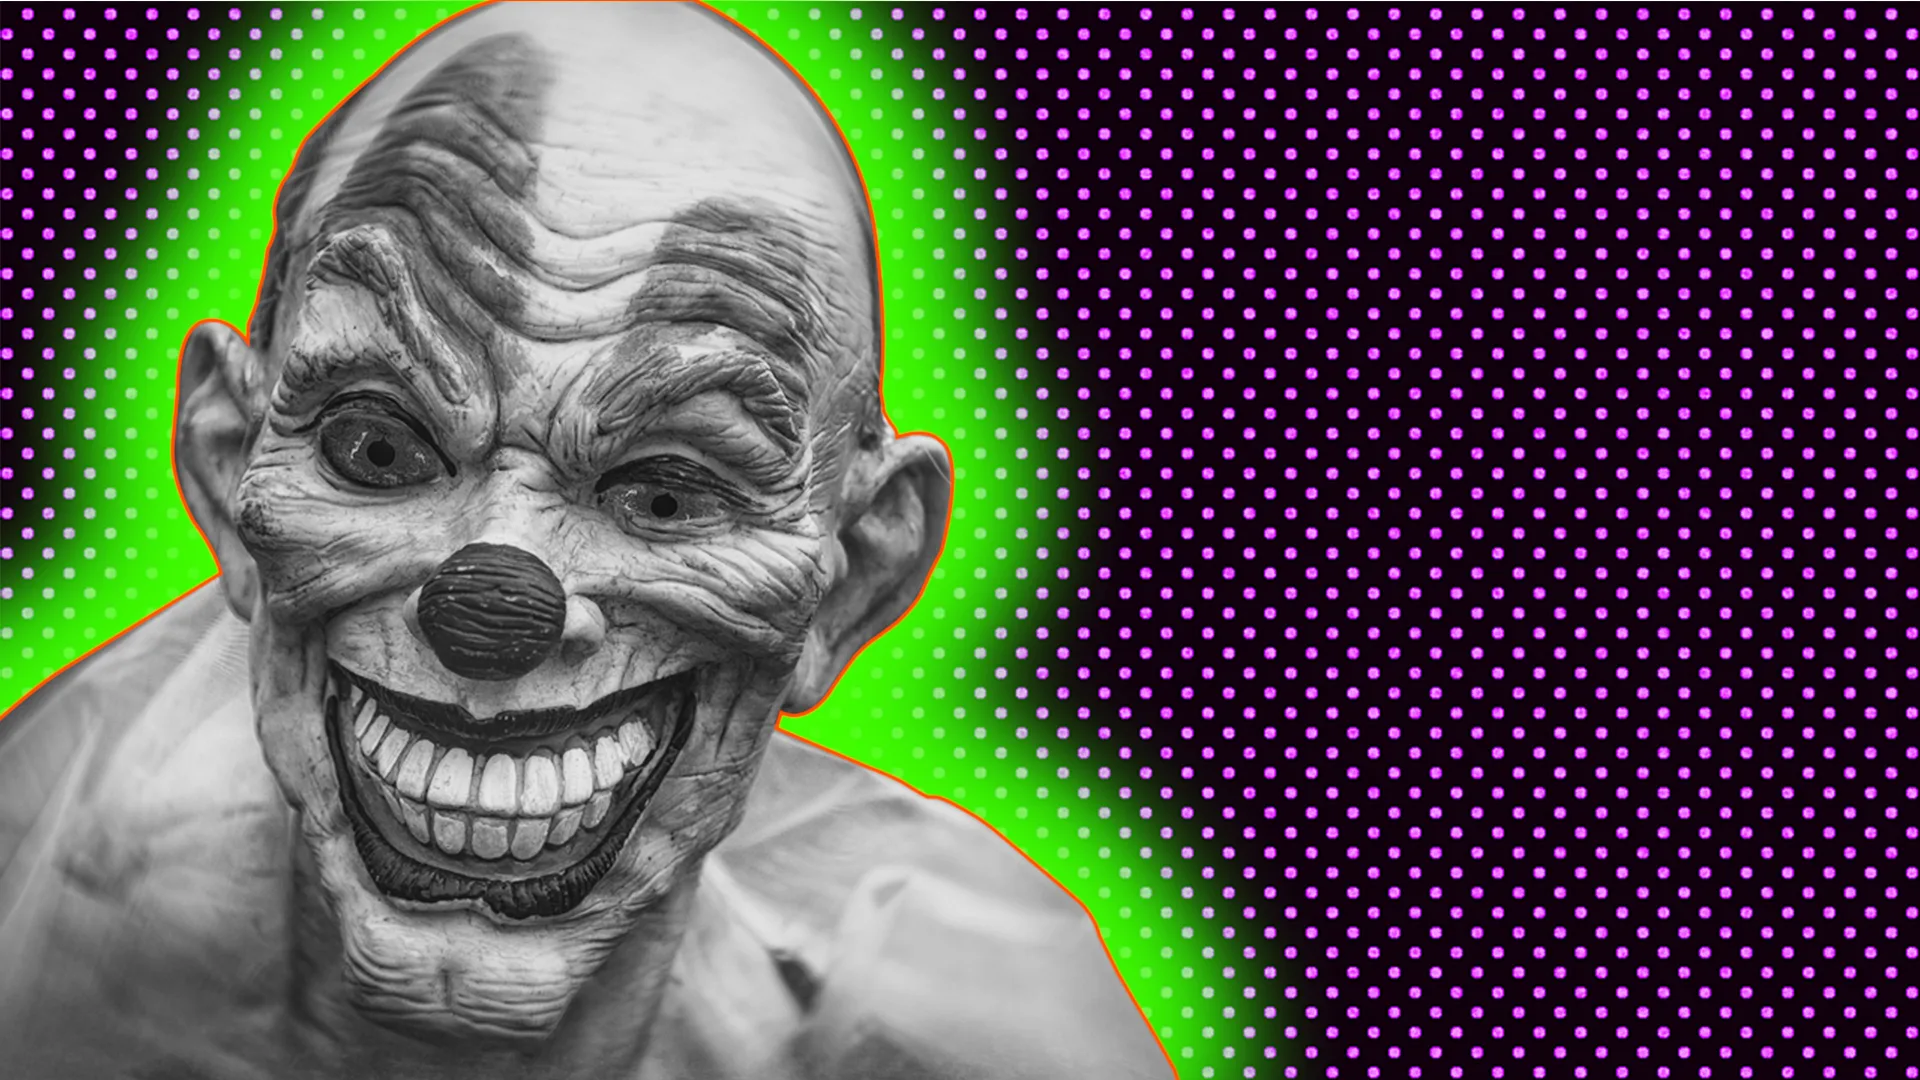 Scary looking clown in black and white with a green glow on a purple and black spotted background